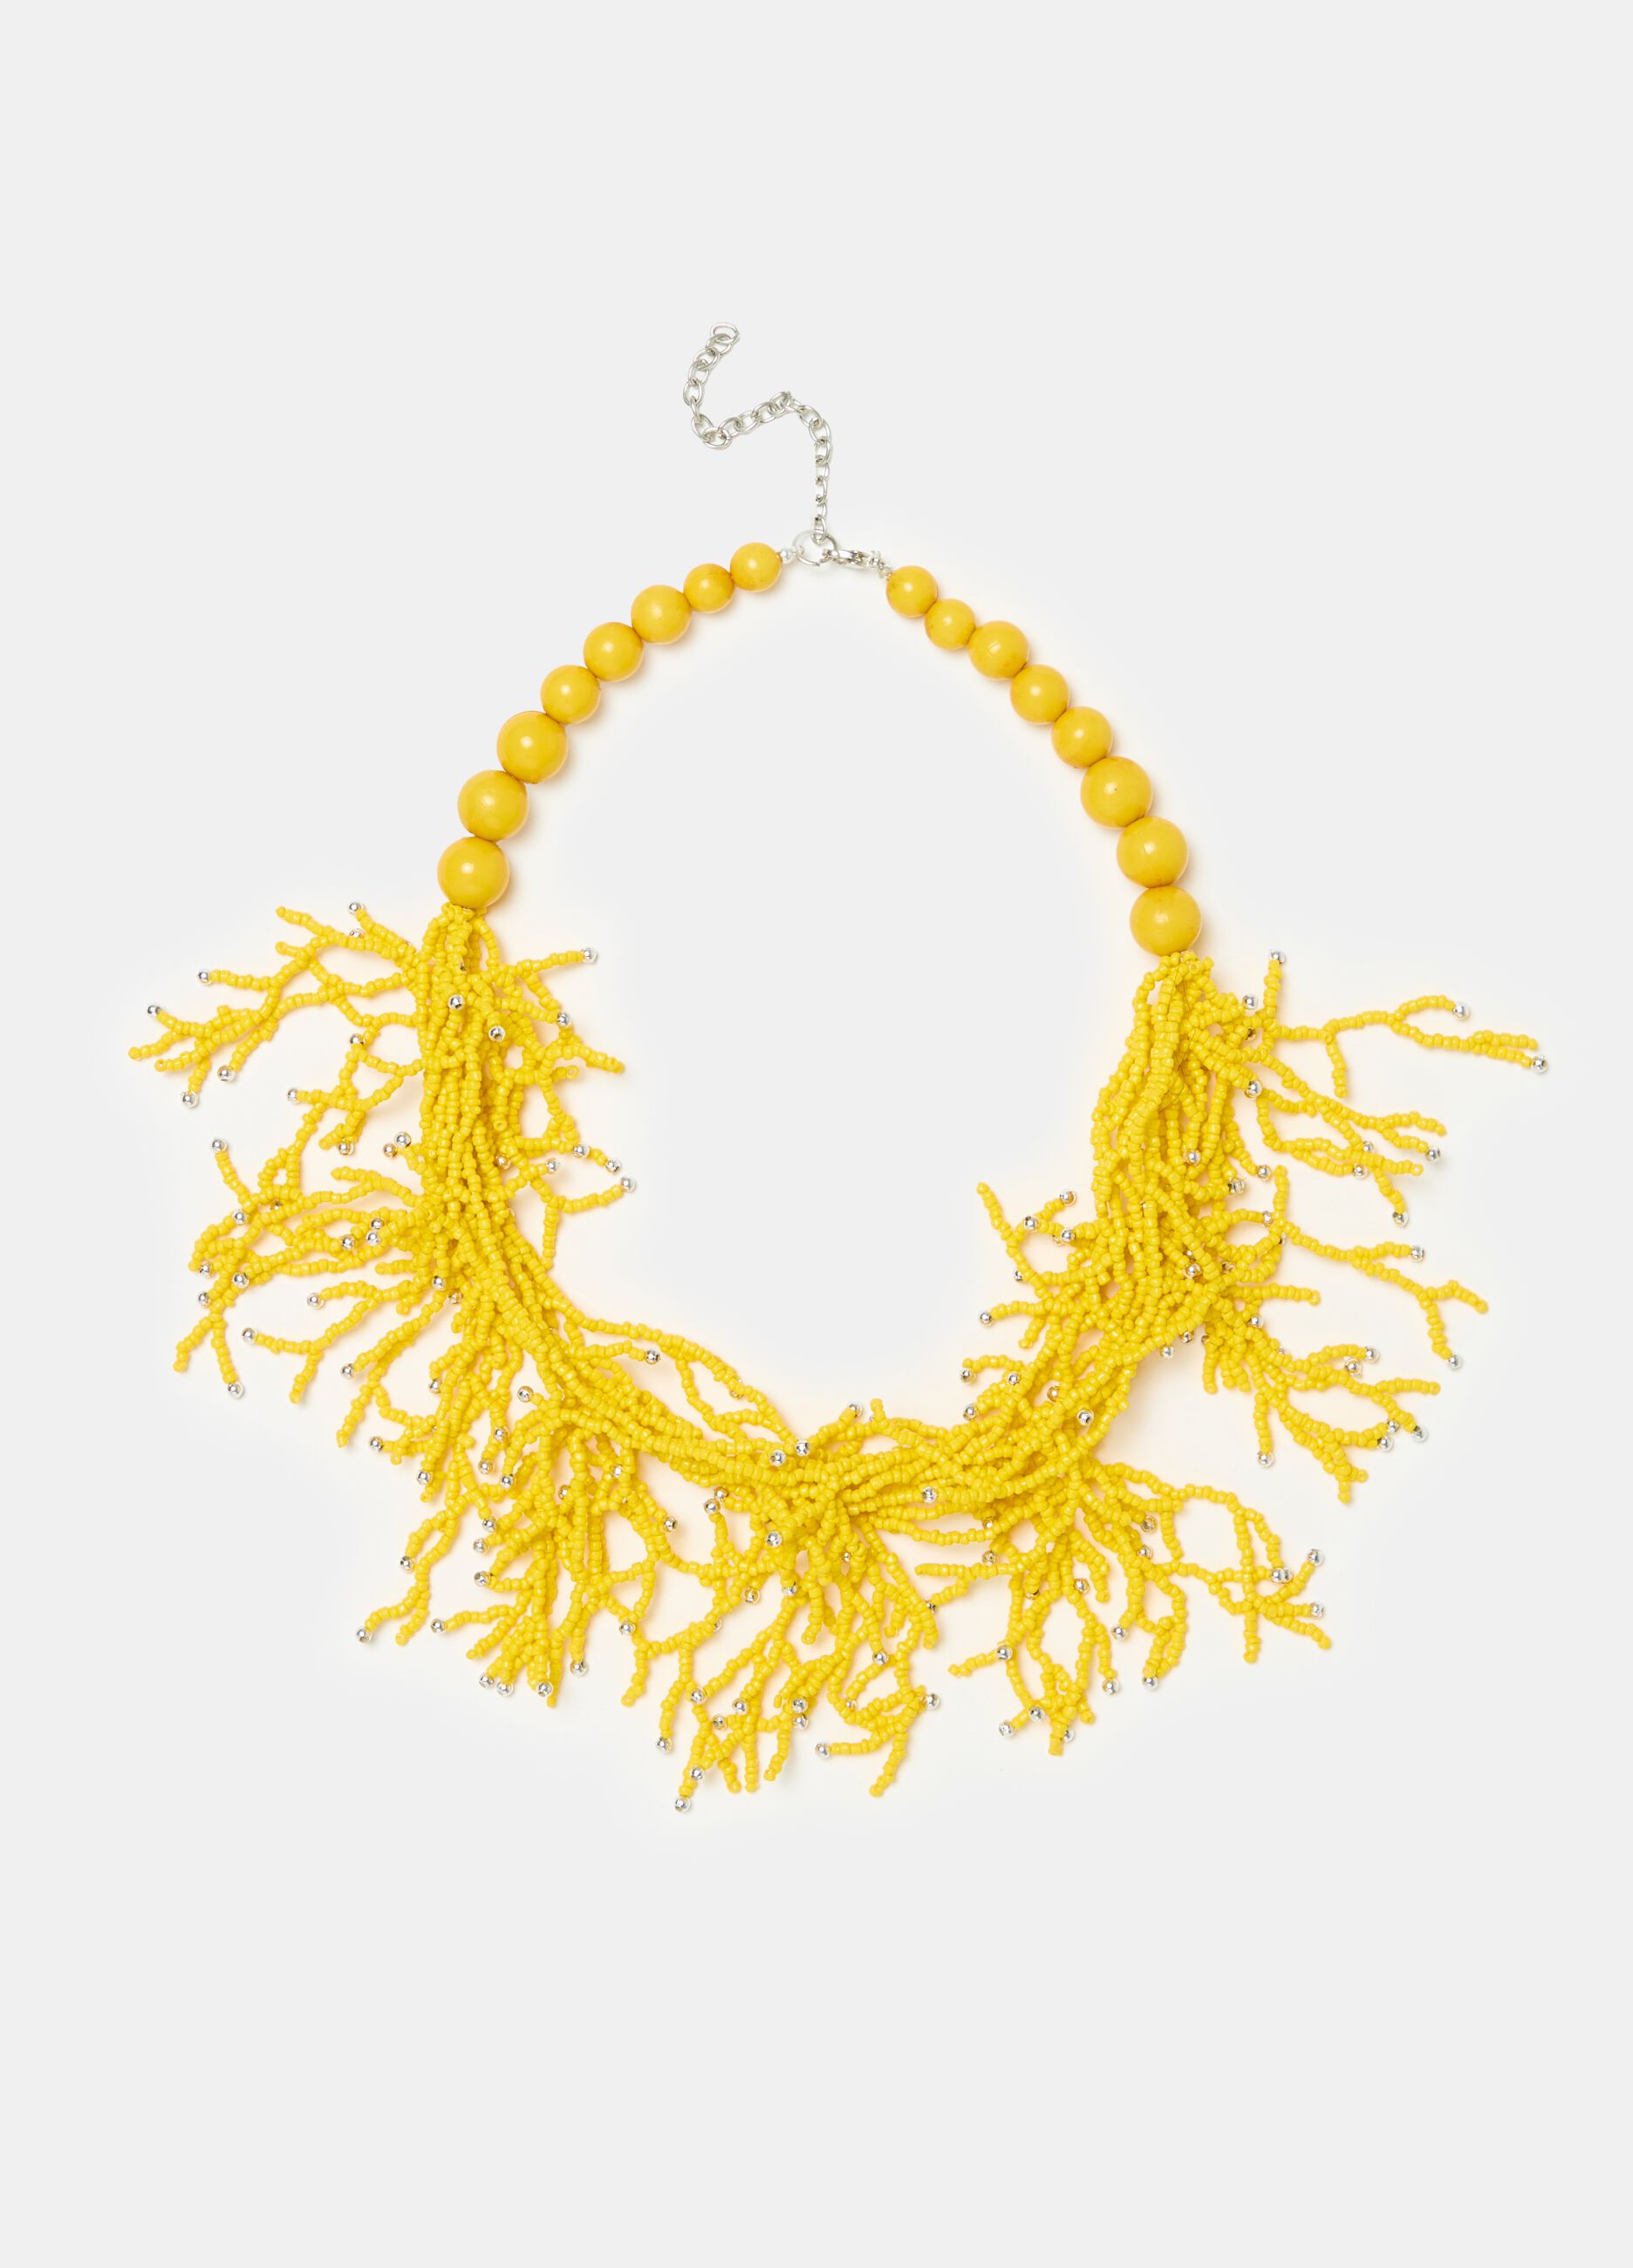 Positano summer necklace with corals and pearls